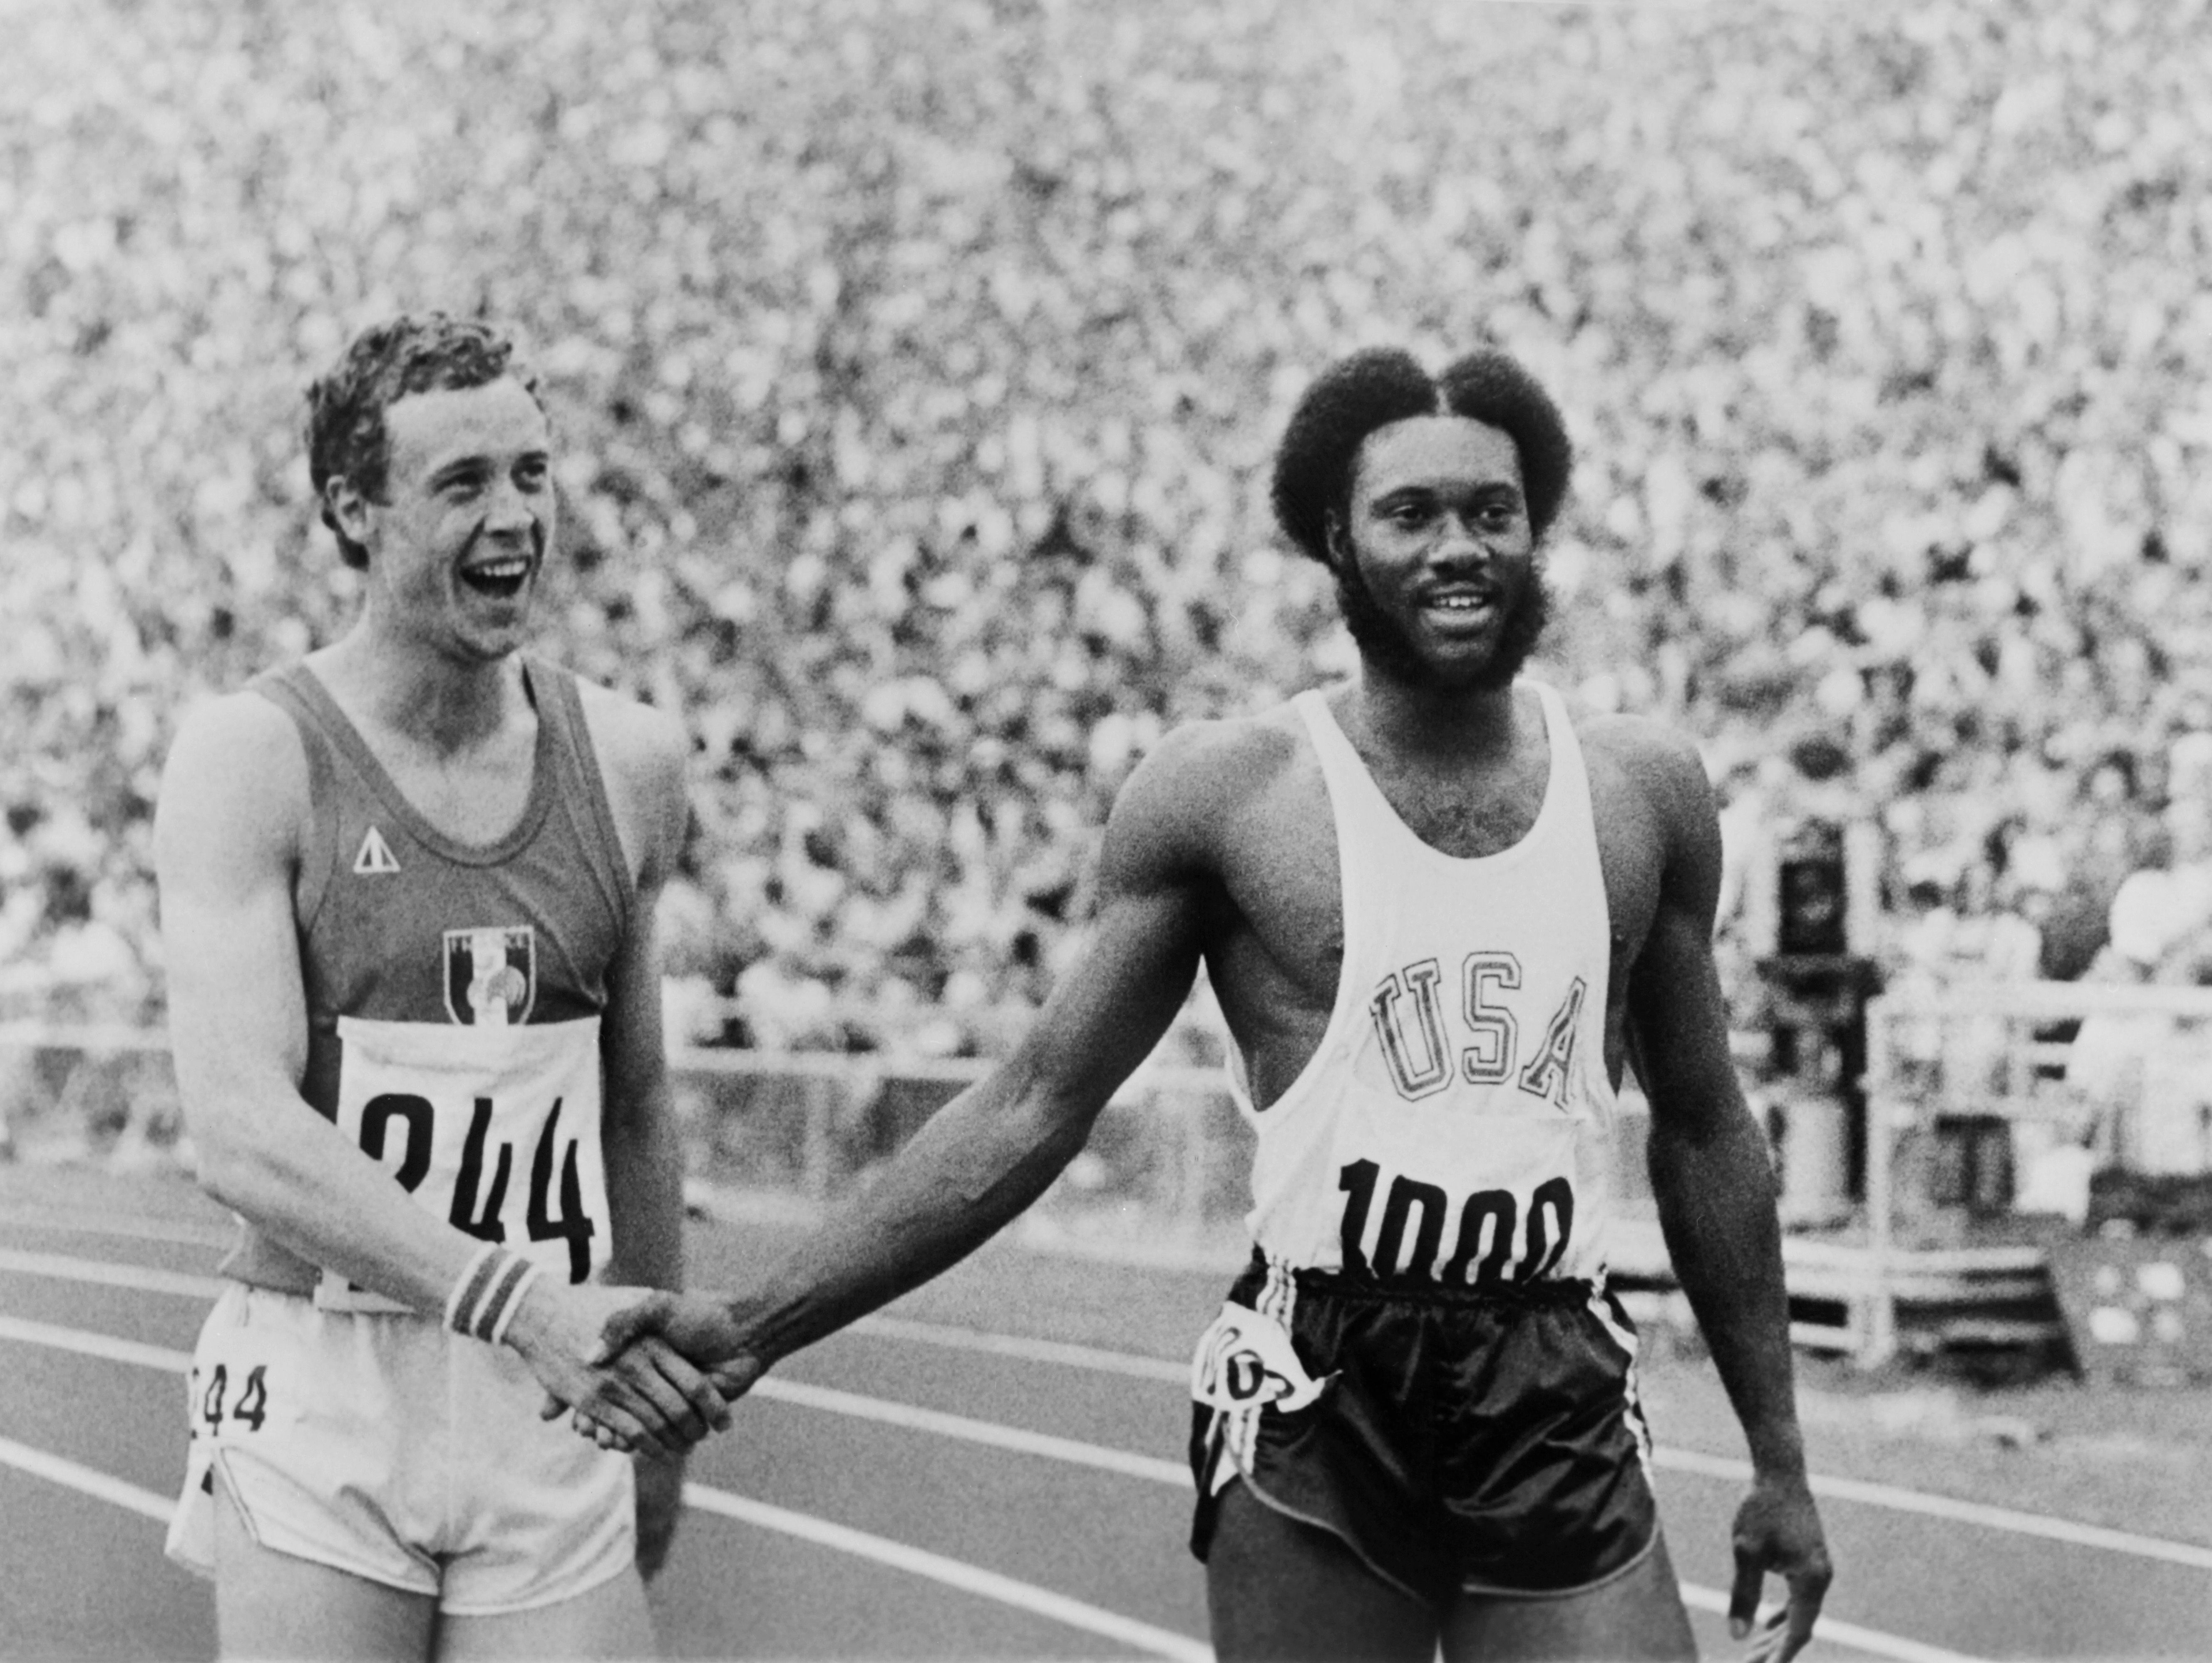 Silver medallist Guy Drut and winner Rod Milburn shake hands after the 110m hurdles at the Munich 1972 Olympic Games